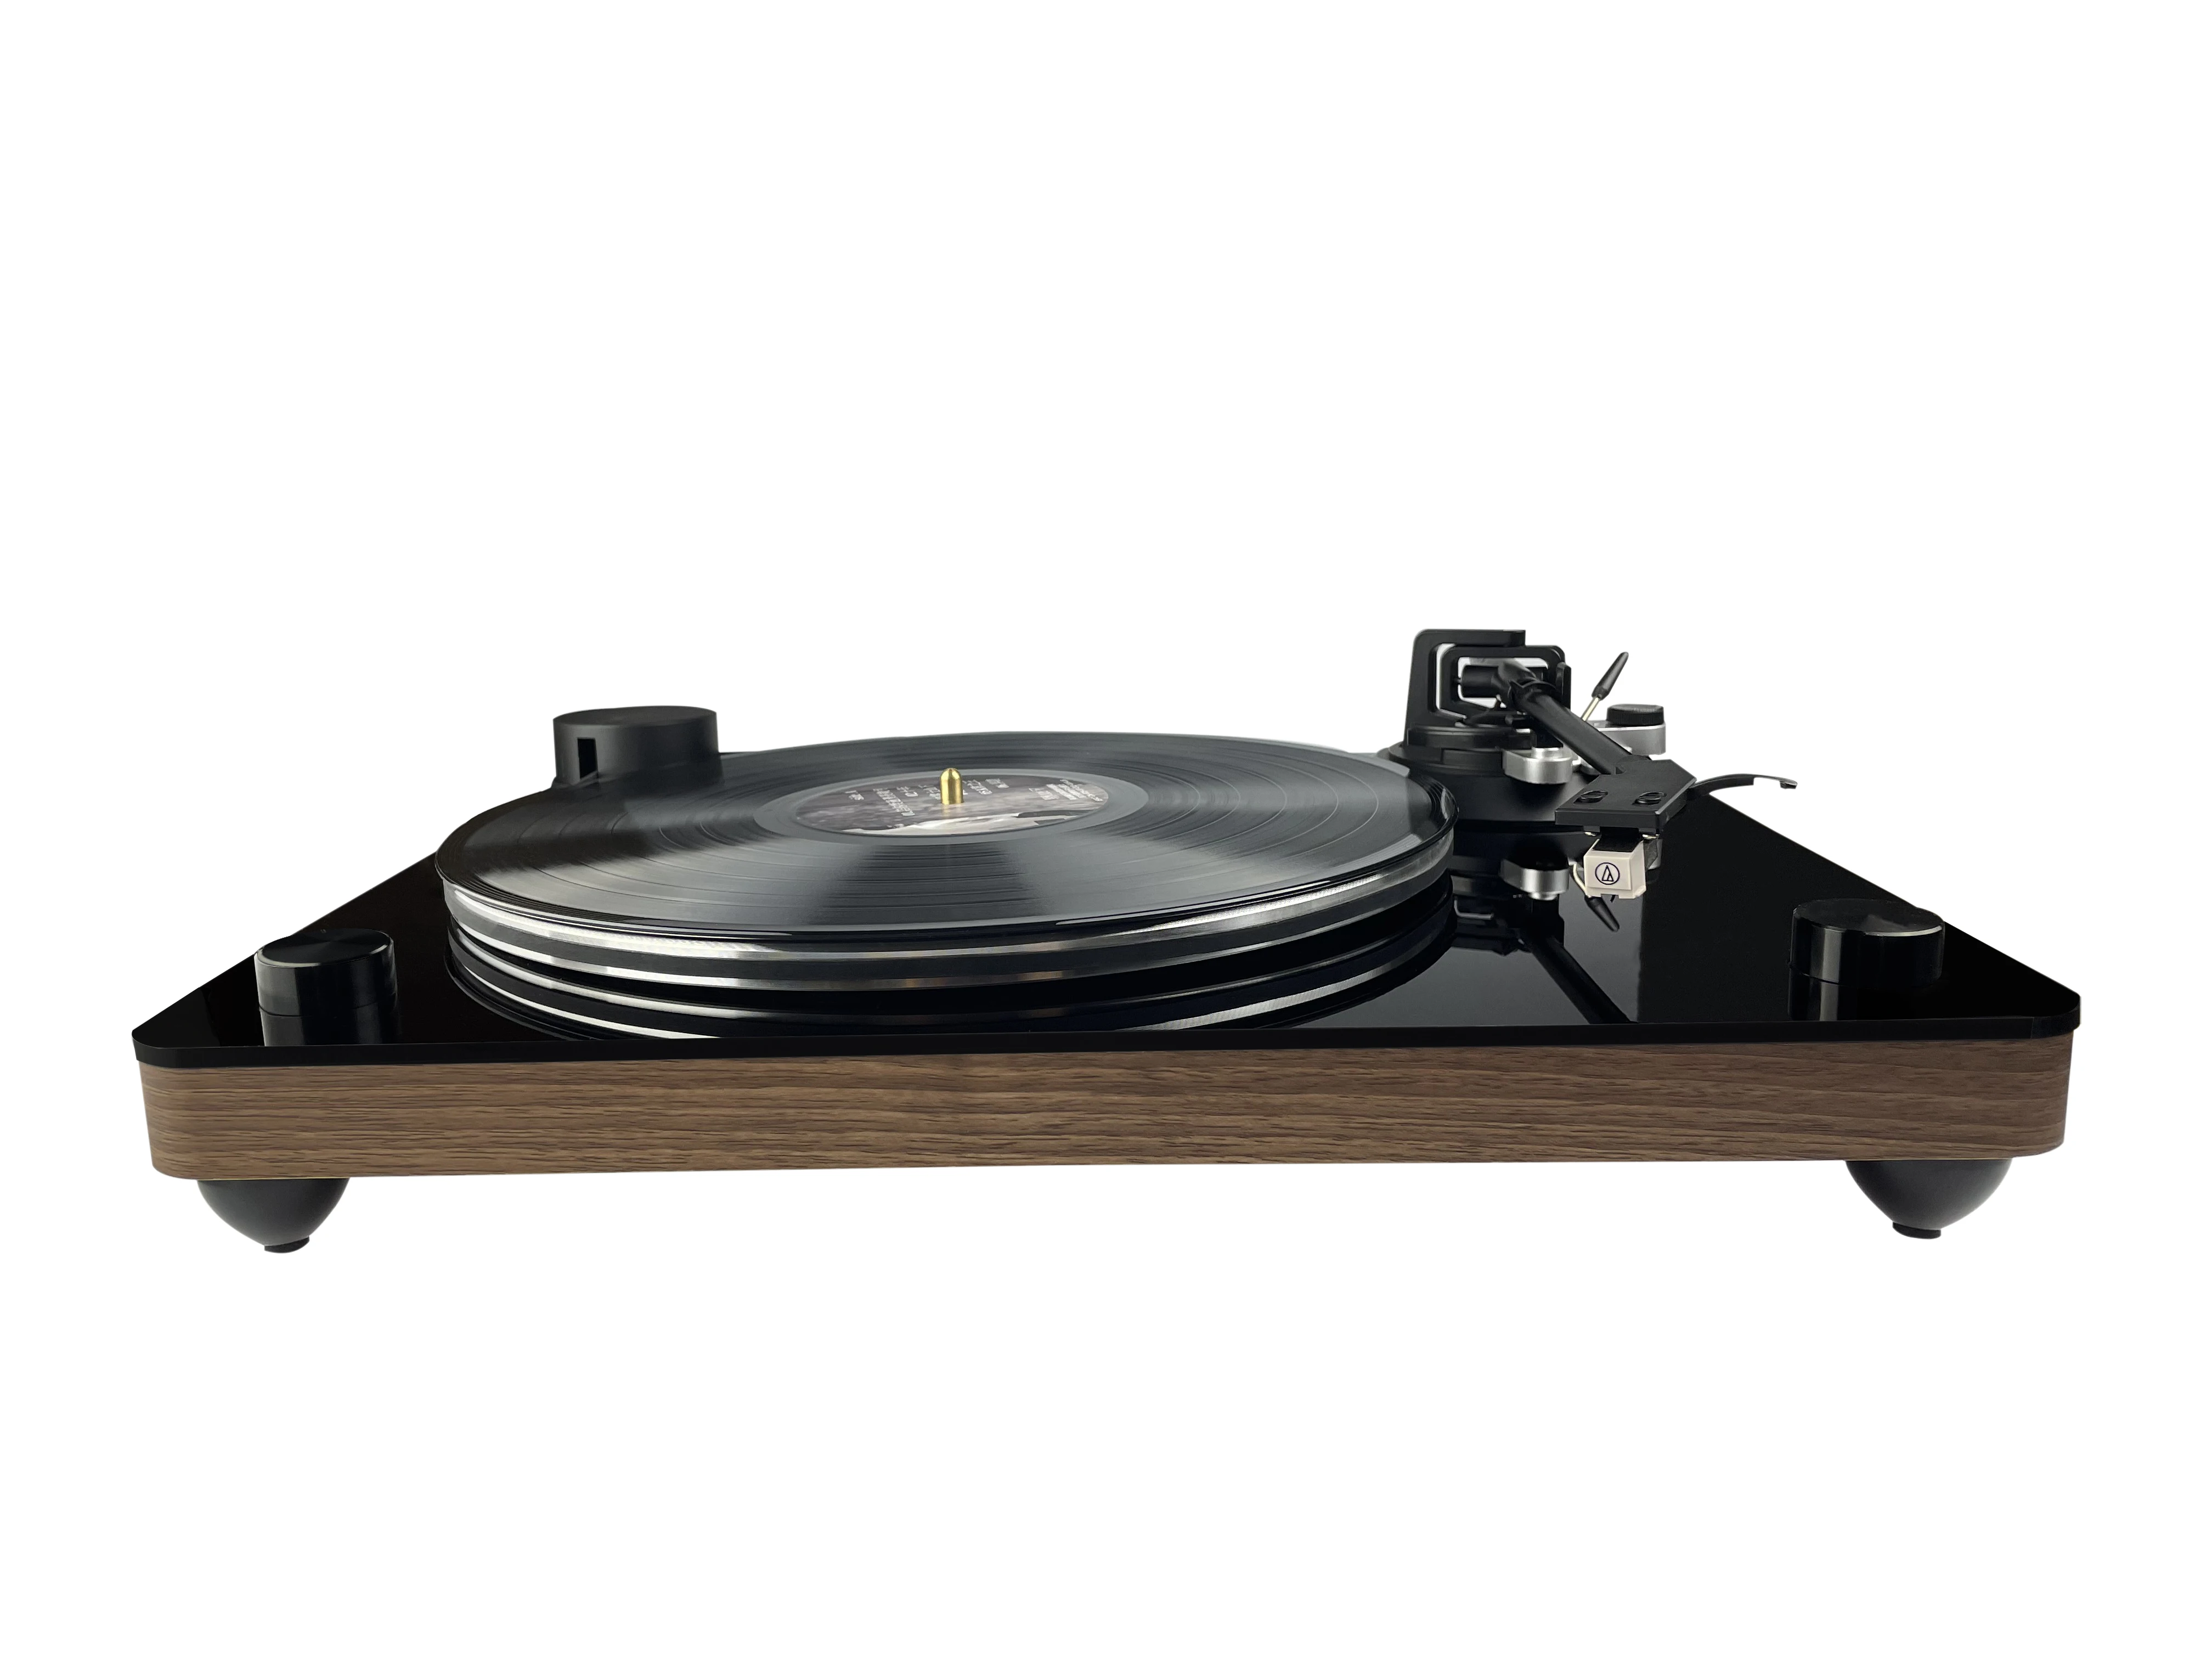 

NEW DIVIDE Belt Drive Turntable with Built-in Phono Preamp, Magnetic Cartridge Stylus AT-3600, 33 or 45 RPM